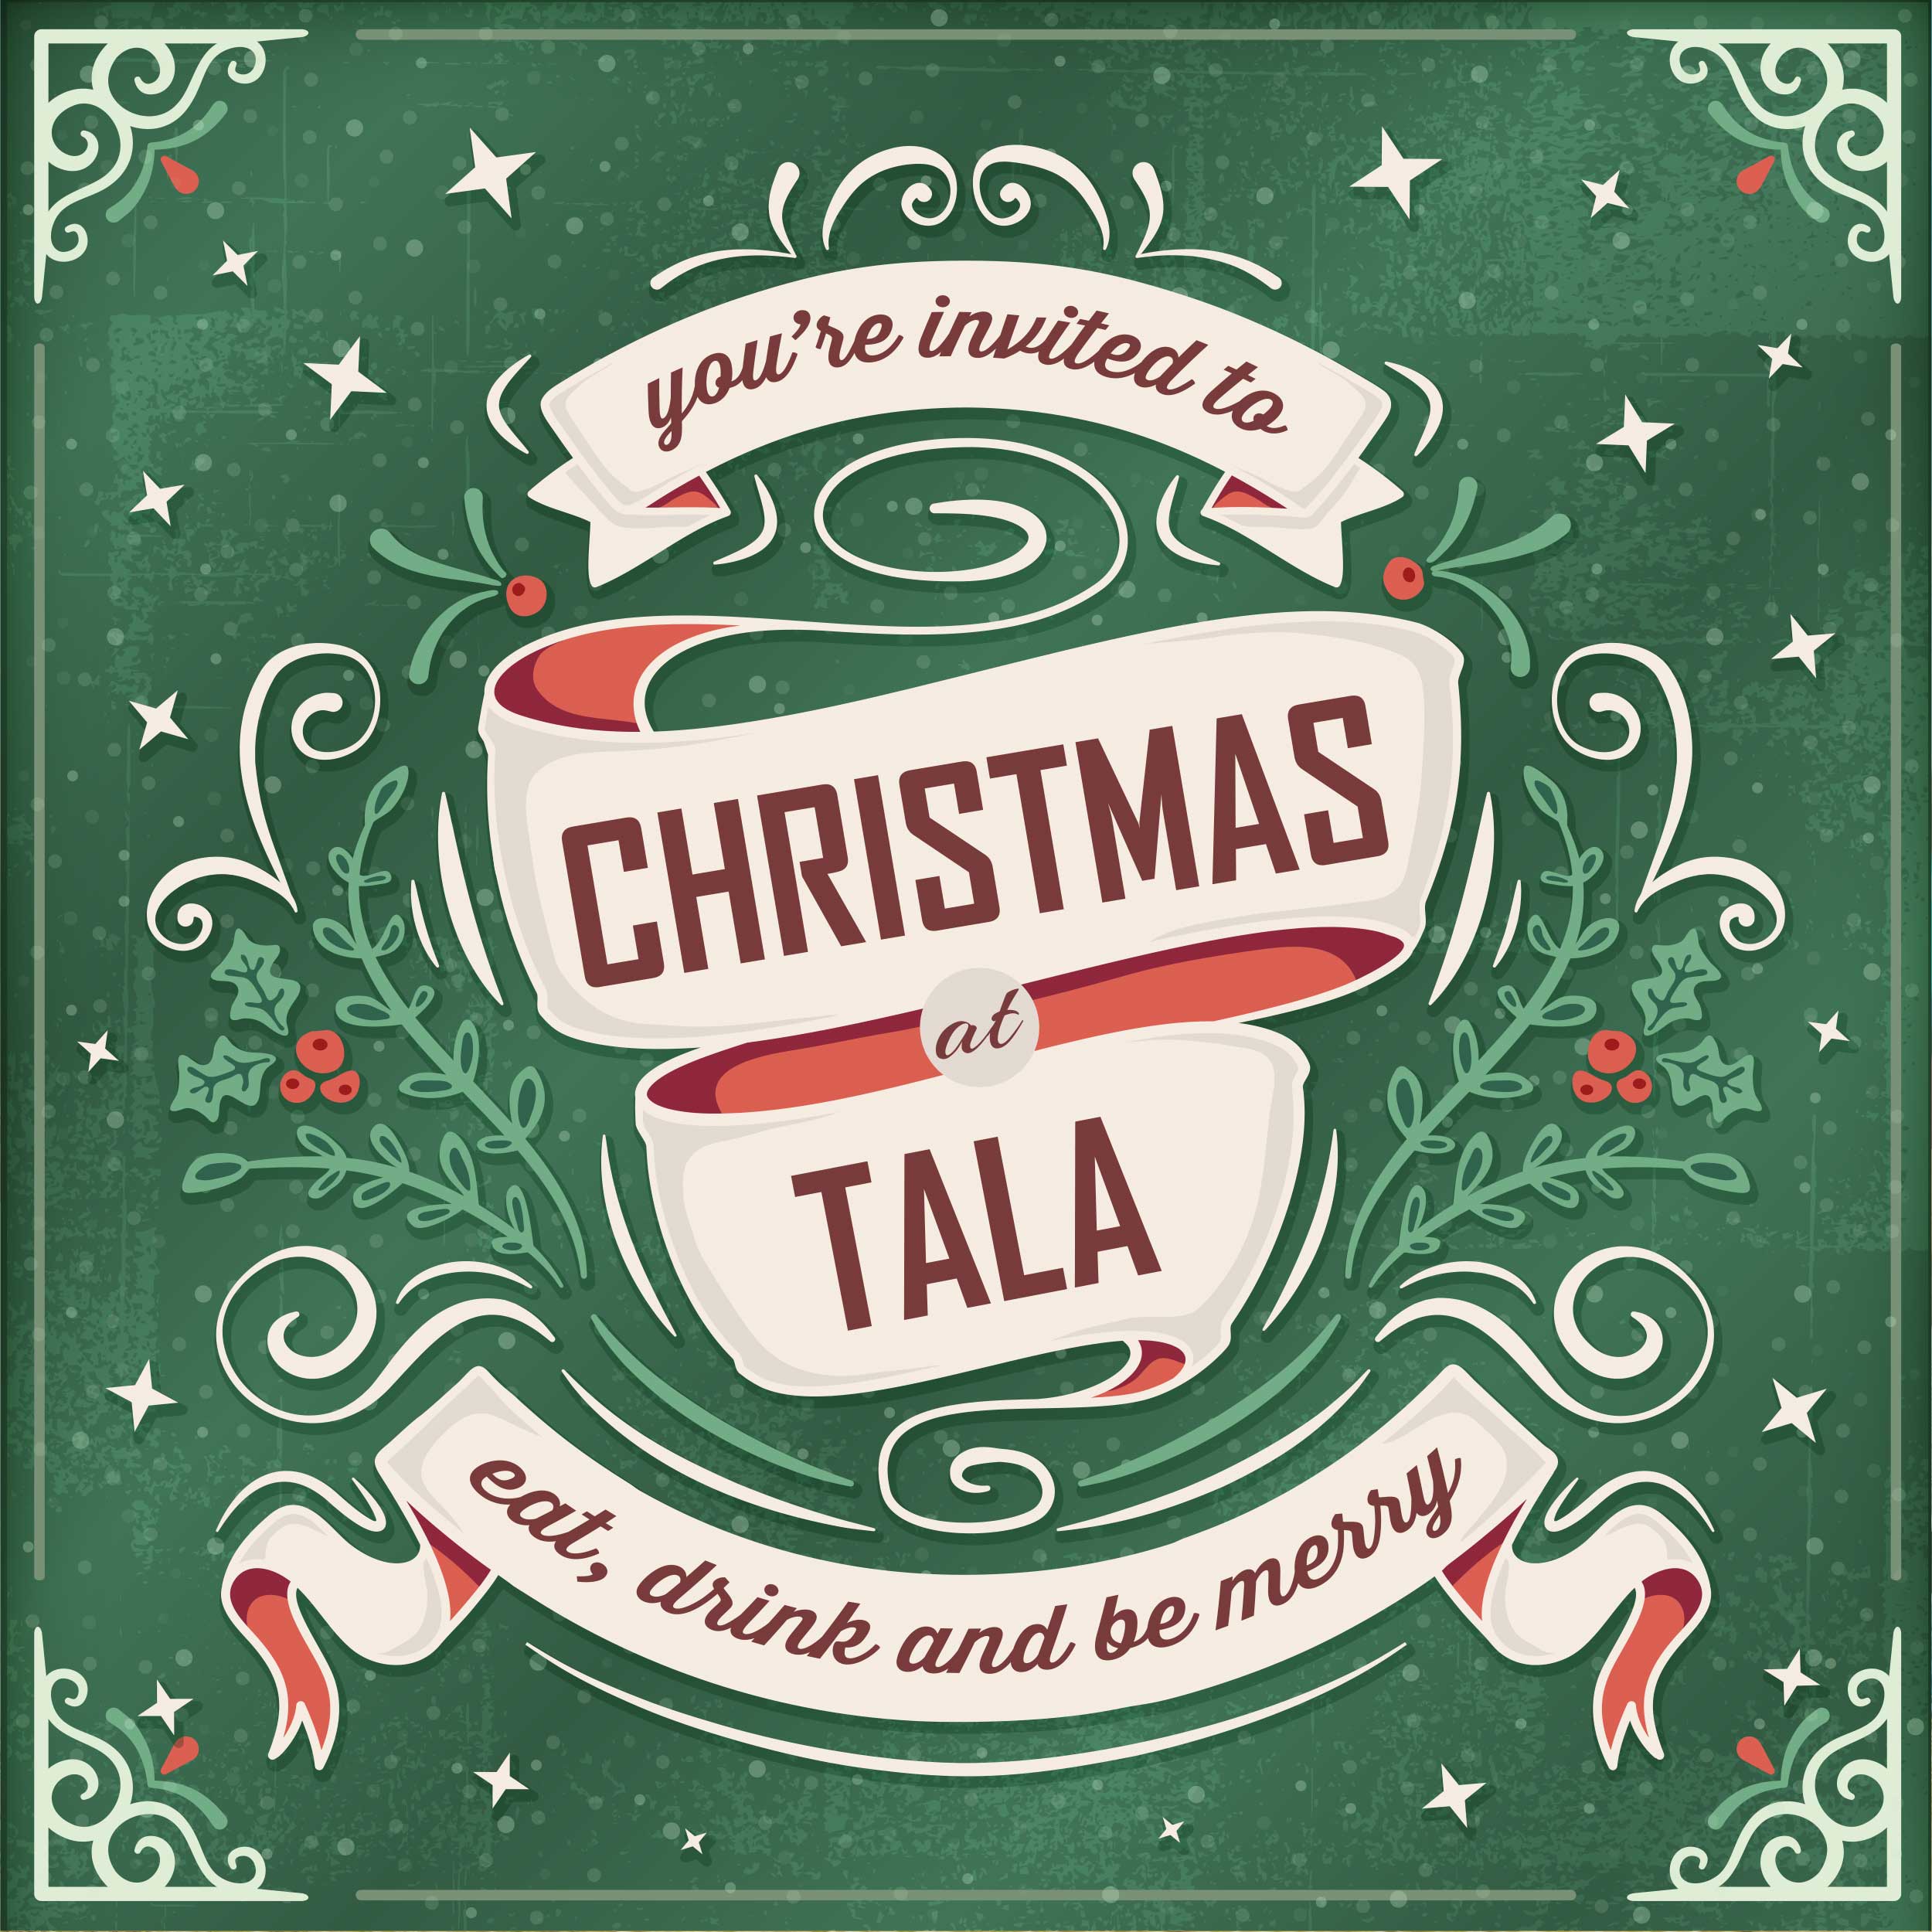 you're invited to Christmas at Tala eat, drink and be merry